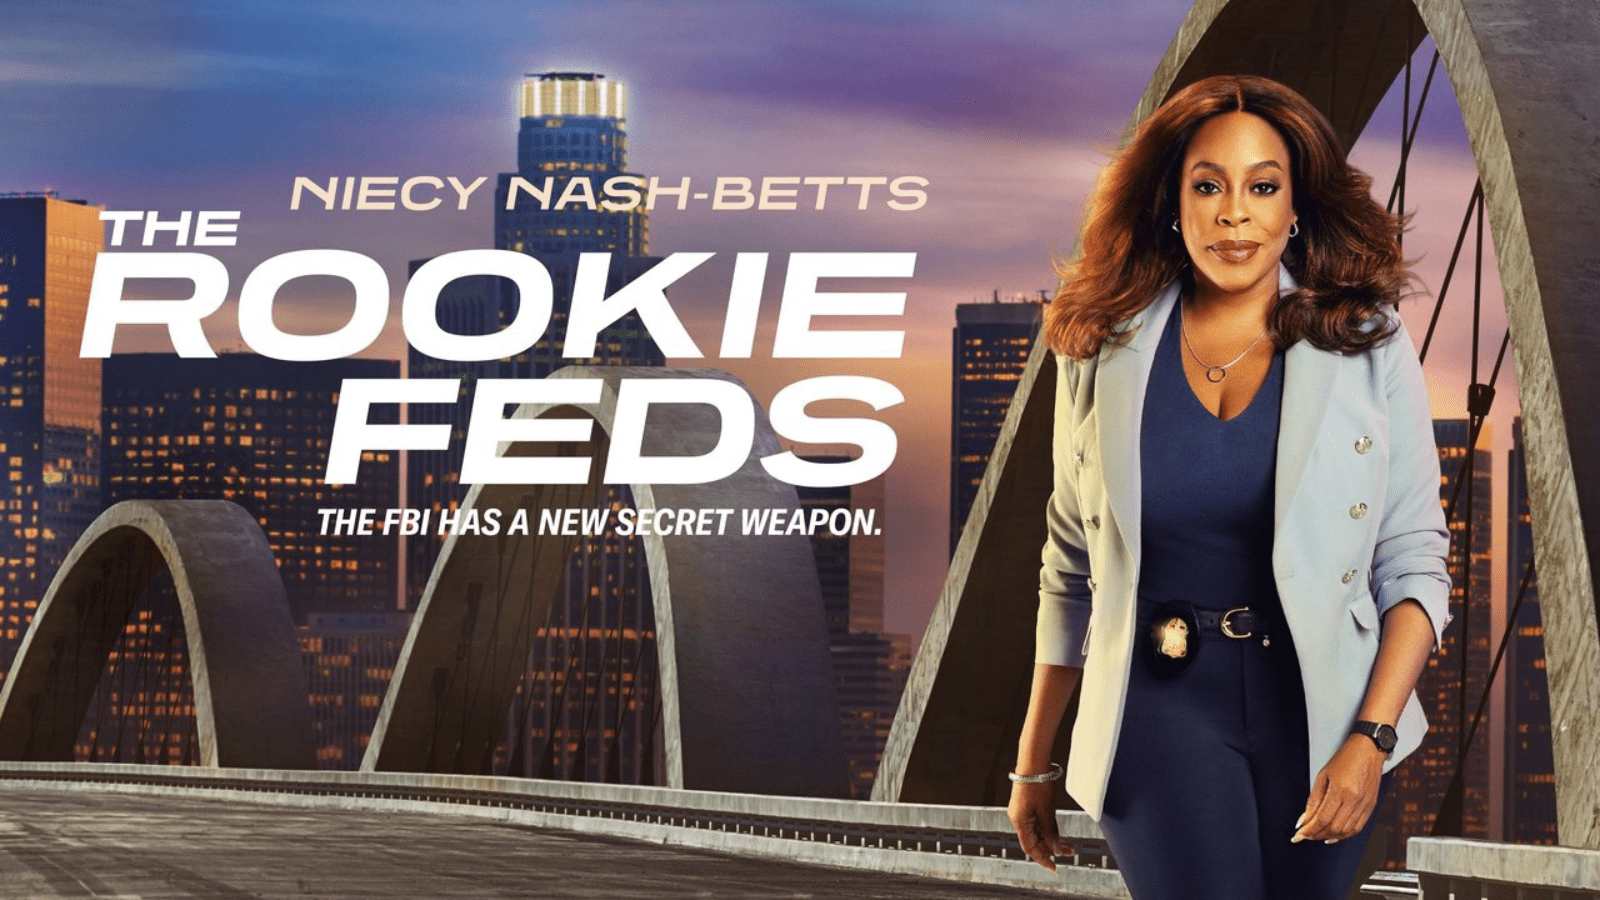 Review of The Rookie: Feds (2022) - Jerri Williams